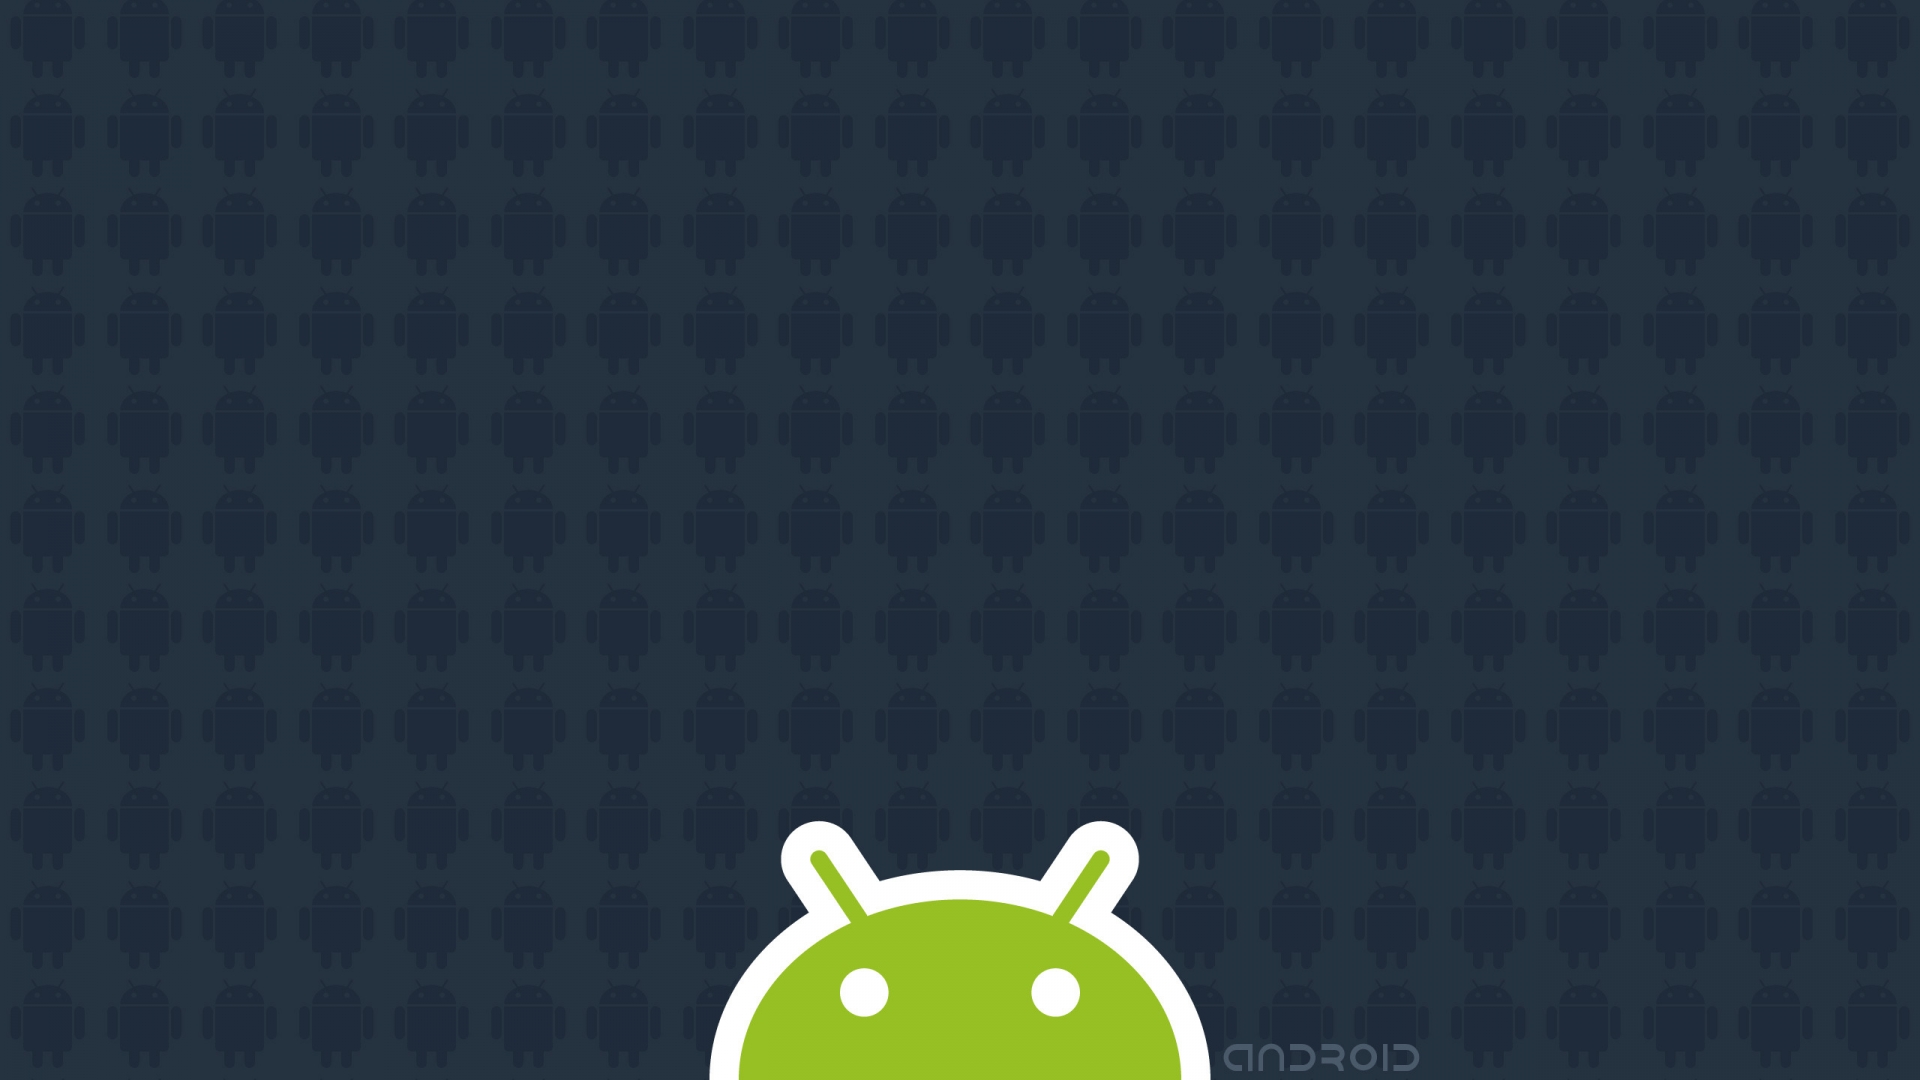 Android Pattern for 1920 x 1080 HDTV 1080p resolution